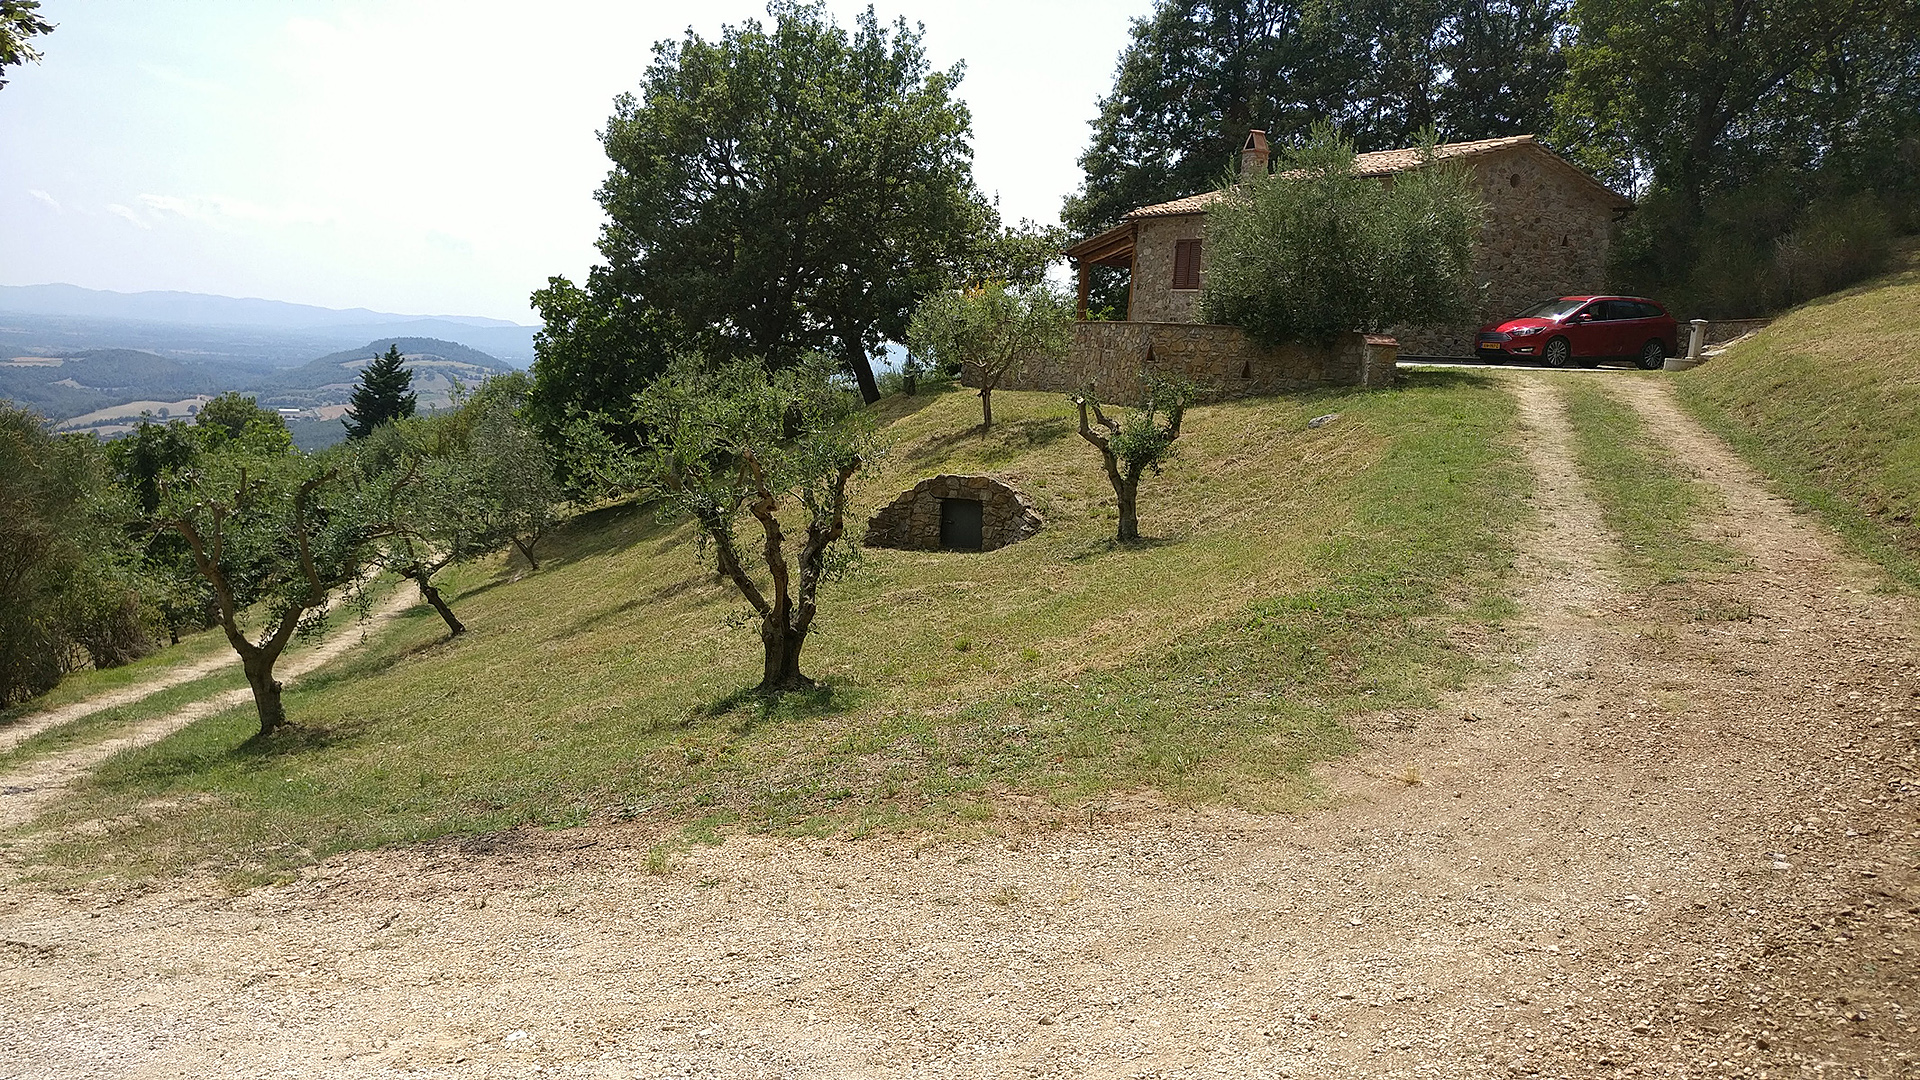 Landhuis in Toscane, Itali; Country house in Tuscany, Italy